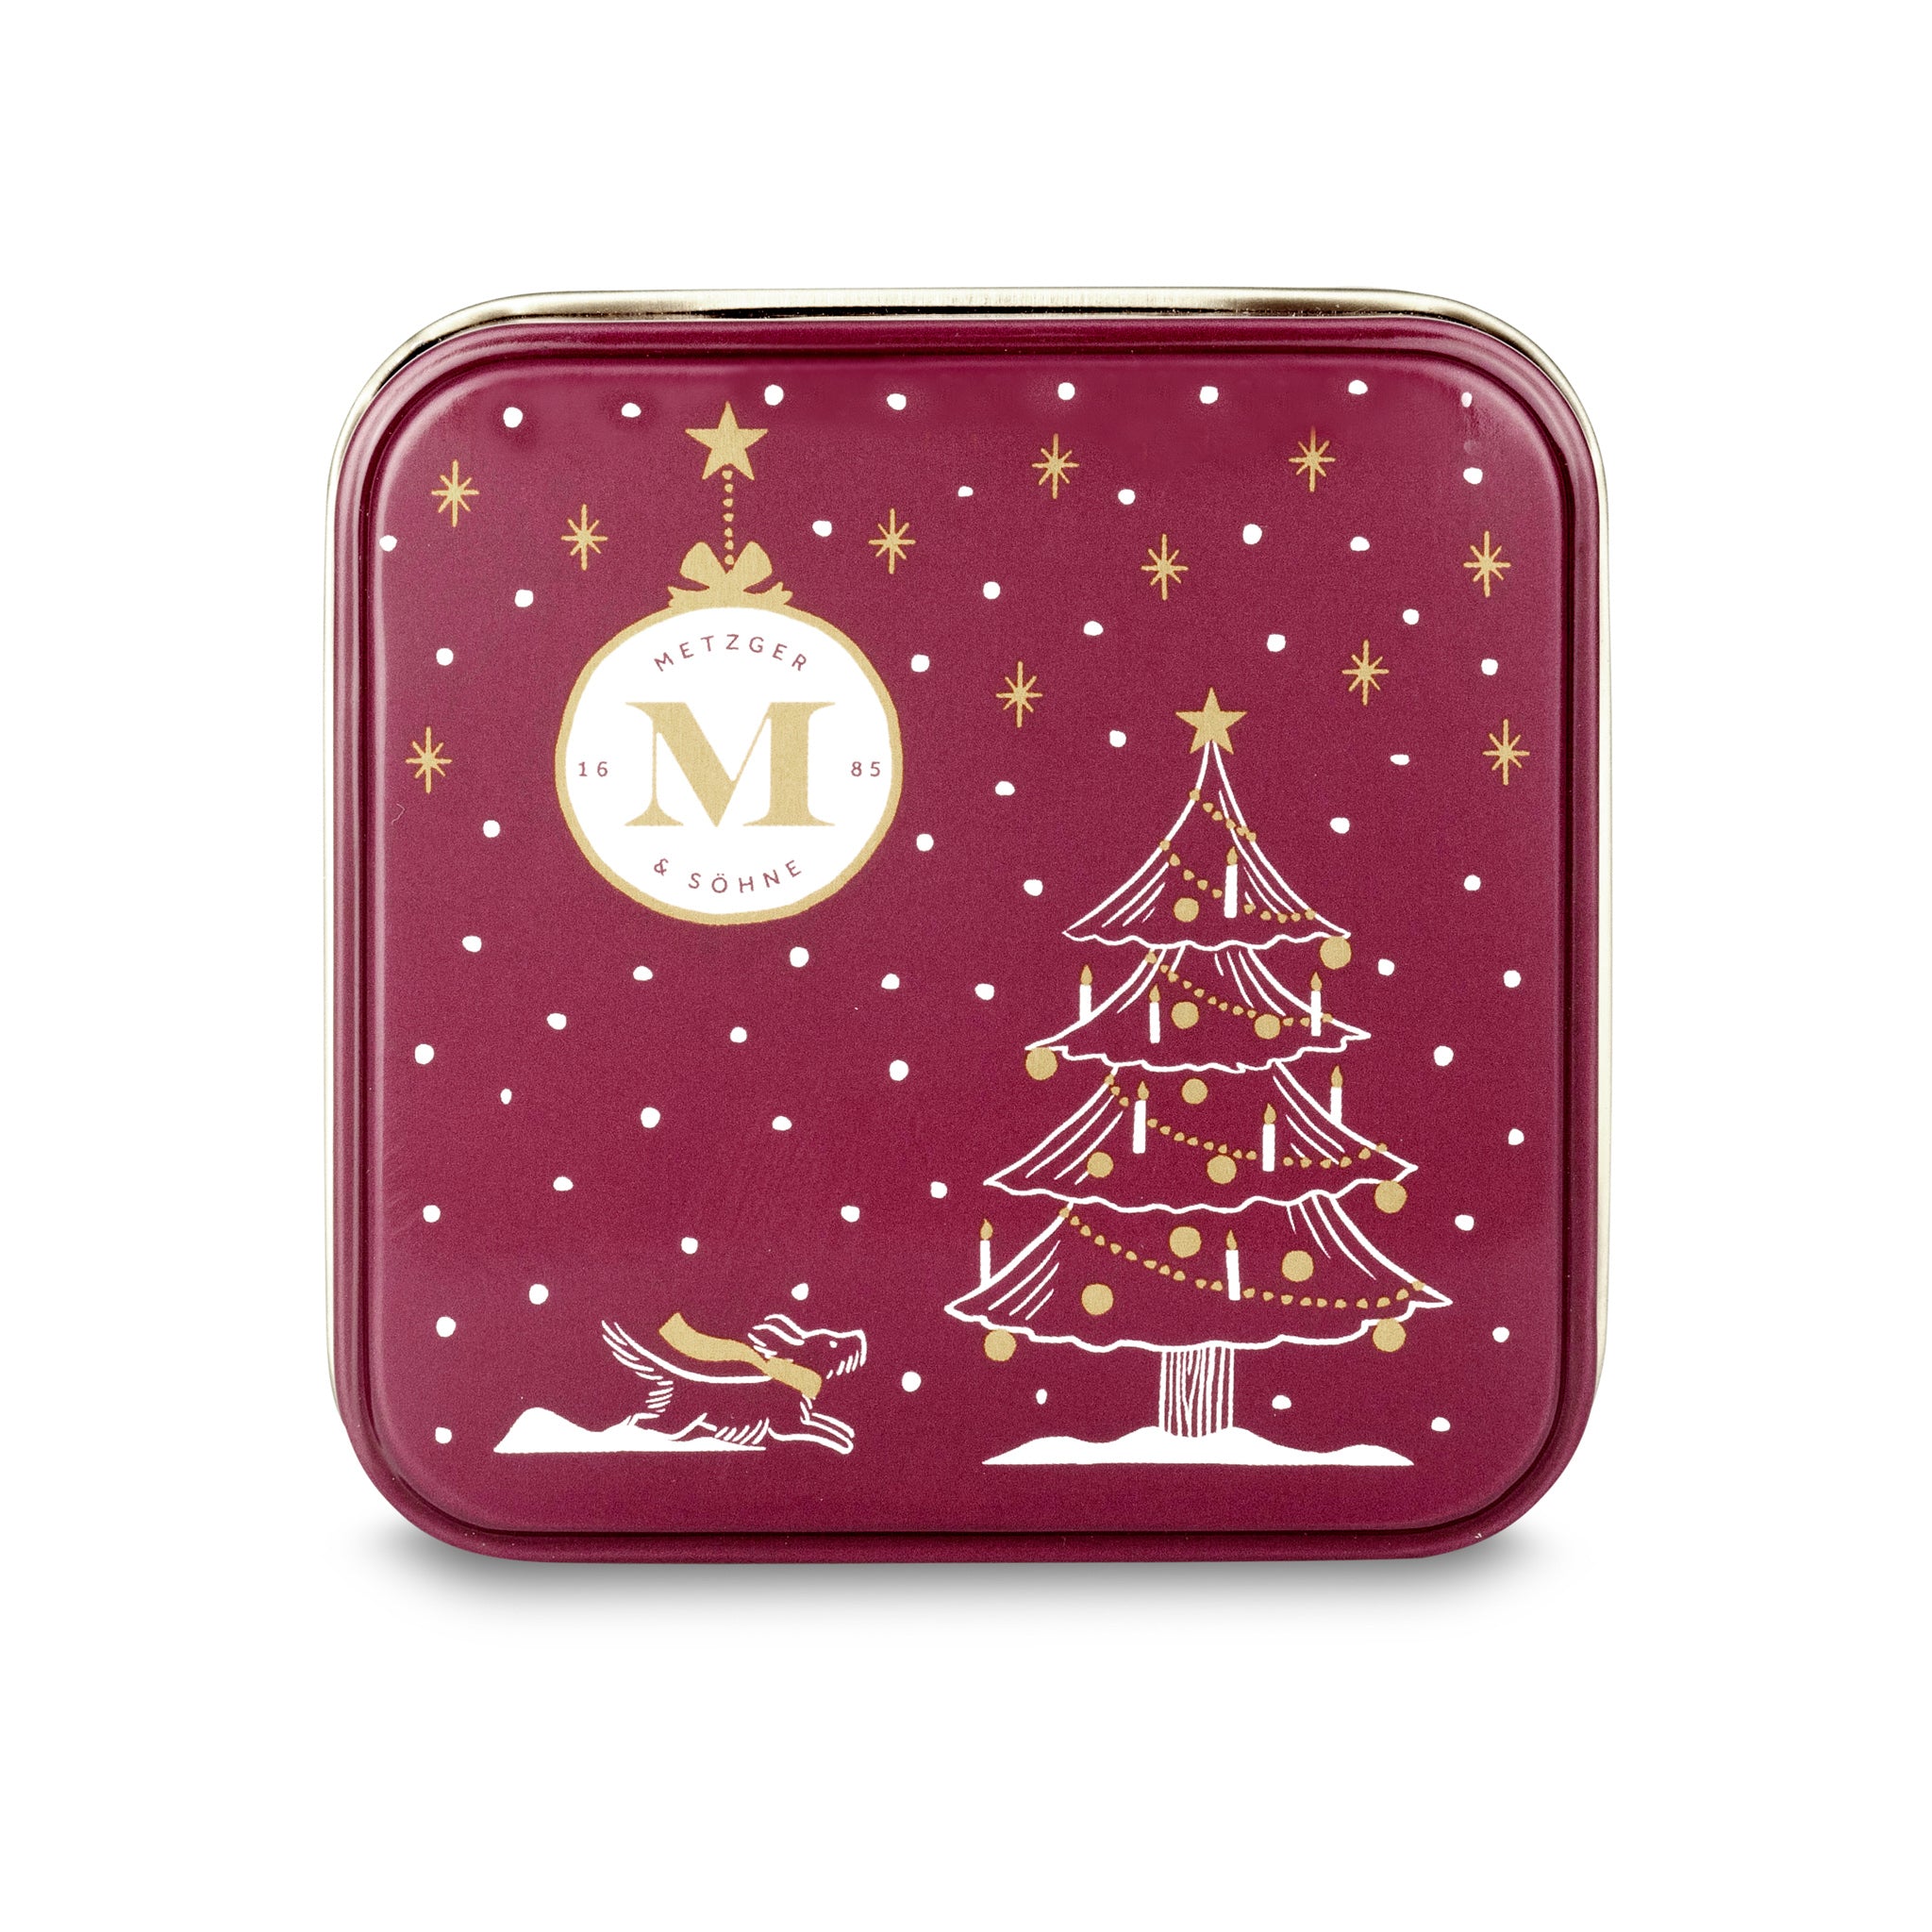 Adorable Lebkuchen 'honey cake' Christmas tin in bordeaux red filled with 4 different Lebkuchen pralines.